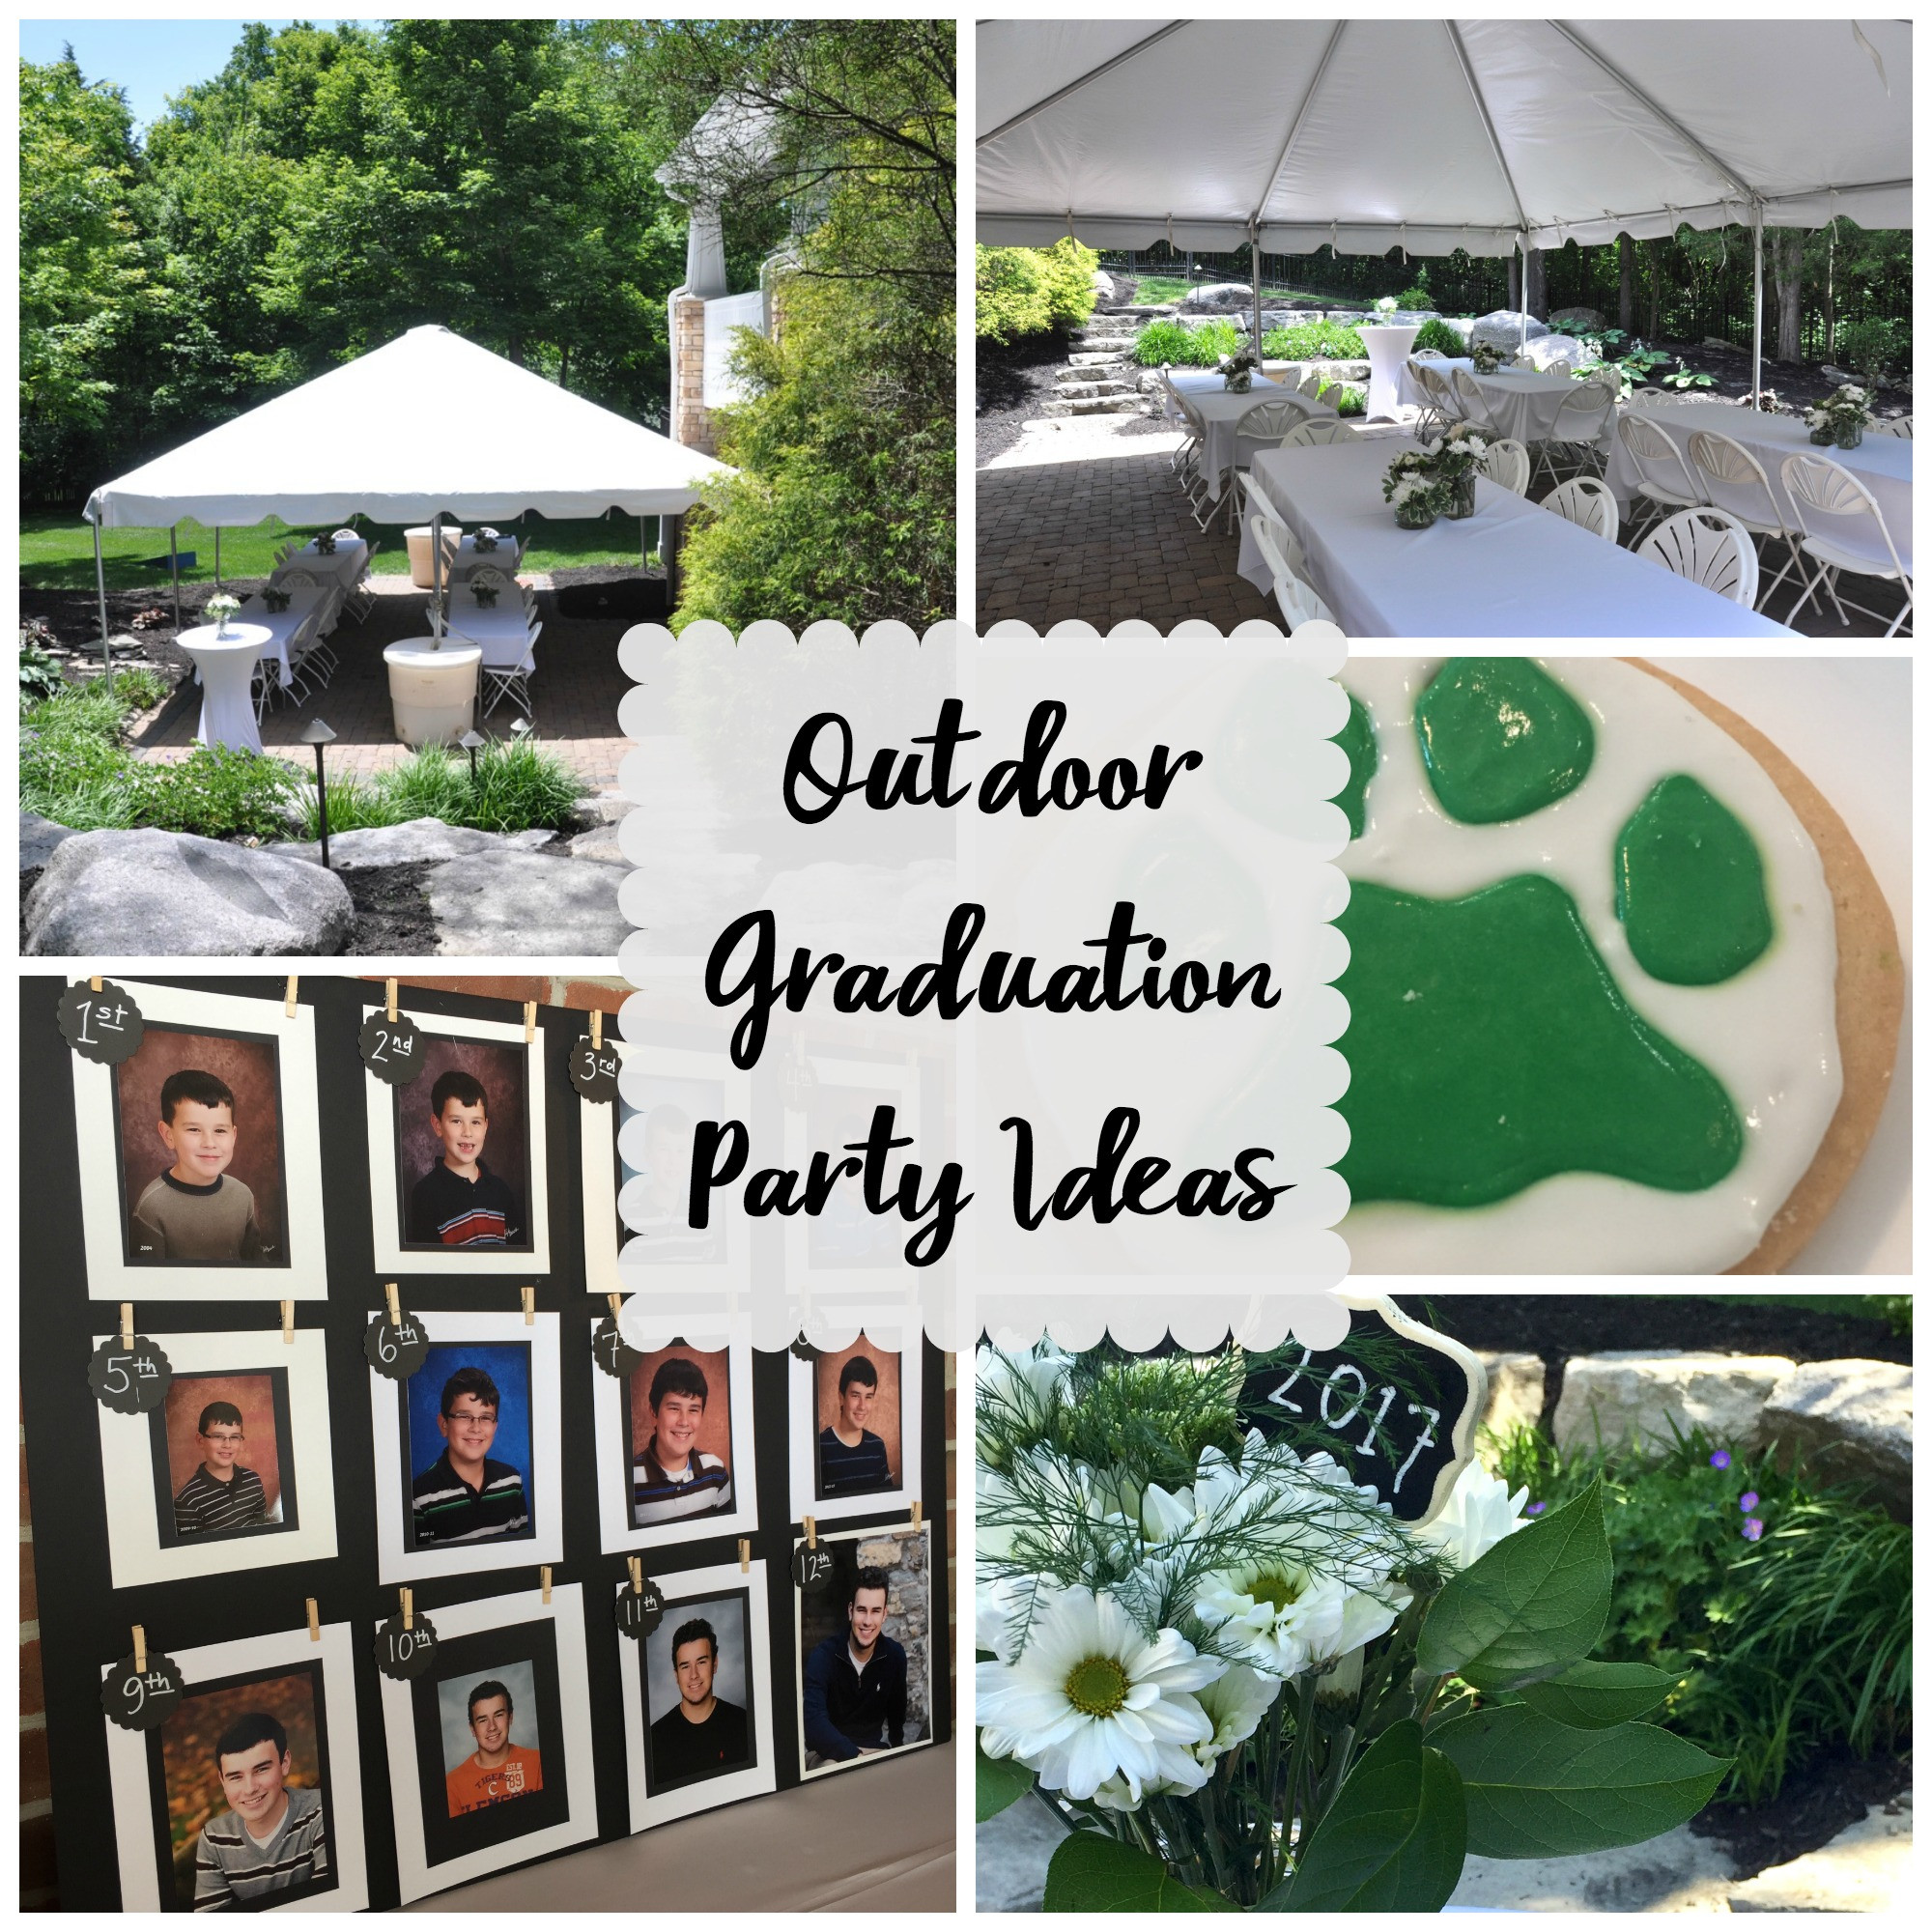 High School Graduation Party Ideas For Guys
 Outdoor Graduation Party Evolution of Style